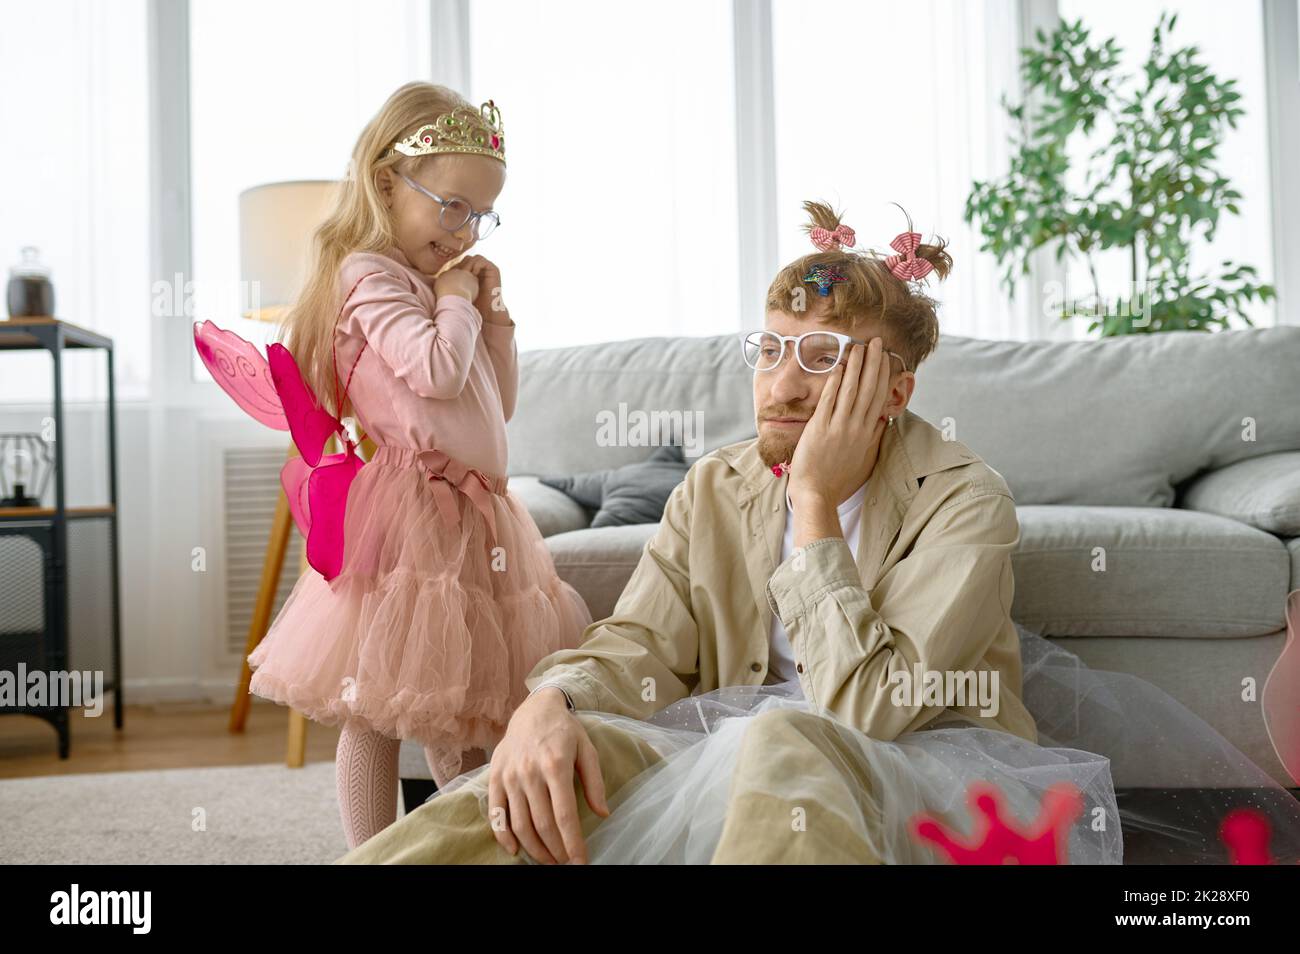 Tired father wearing having fun with daughter Stock Photo